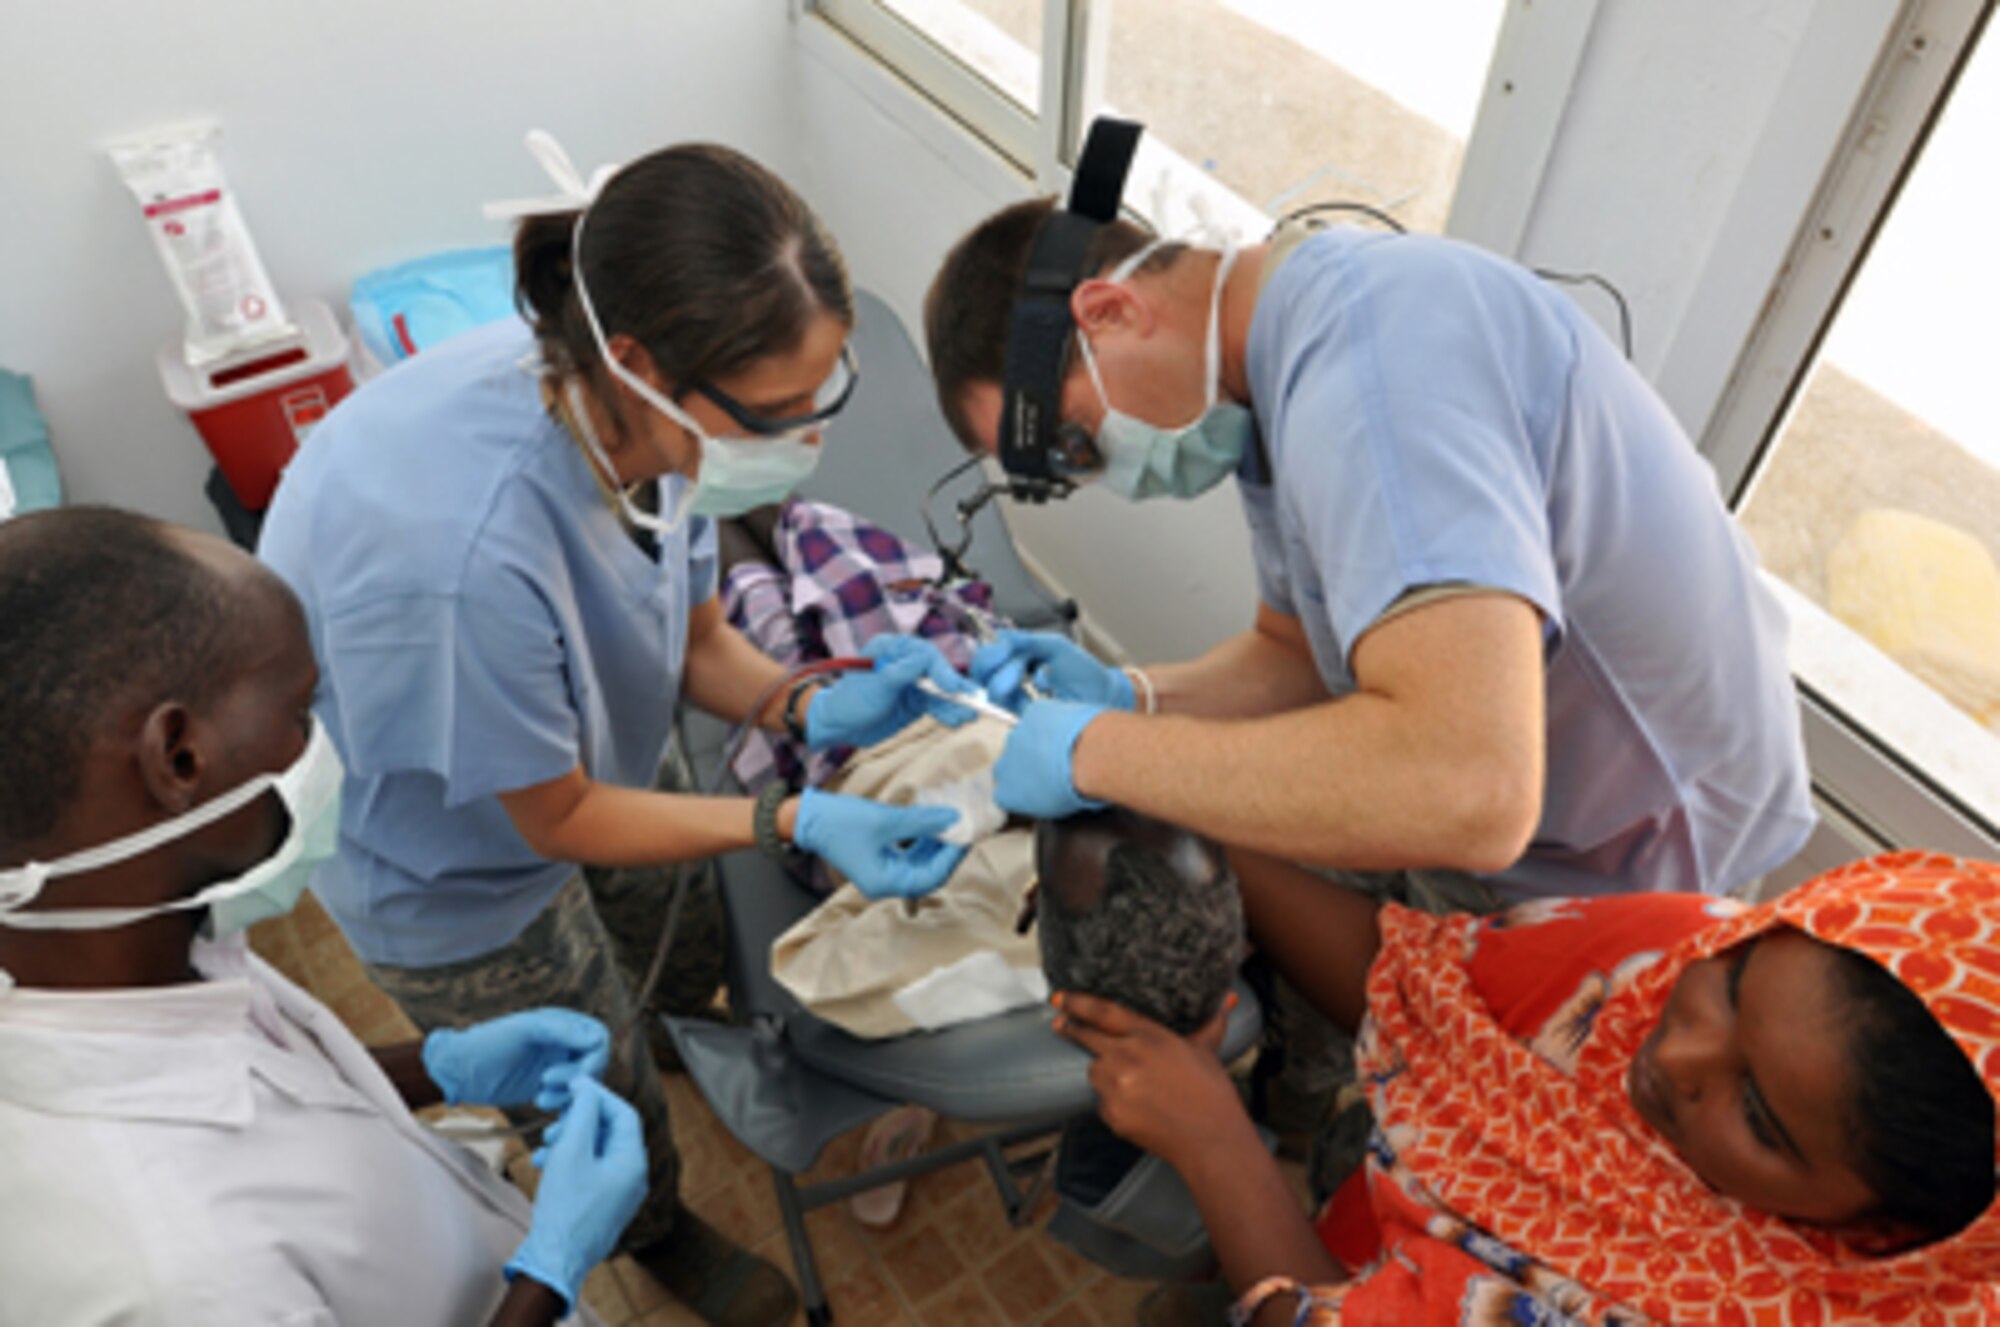 Staff Sergeant Leah Potter and Captain Robert Spriggel treat a dental patient May 5, 2011, during a Medical Capacity Program mission in Obock, Djibouti. Dentists attached to Combined Joint Task Force -- Horn of Africa cared for Obock citizens with periodontal diseases. The MEDCAP also featured optometric and preventative care performed by 20 service members attached to CJTF-HOA. (U.S. Air Force photo by Lt. Col. Leslie Pratt)